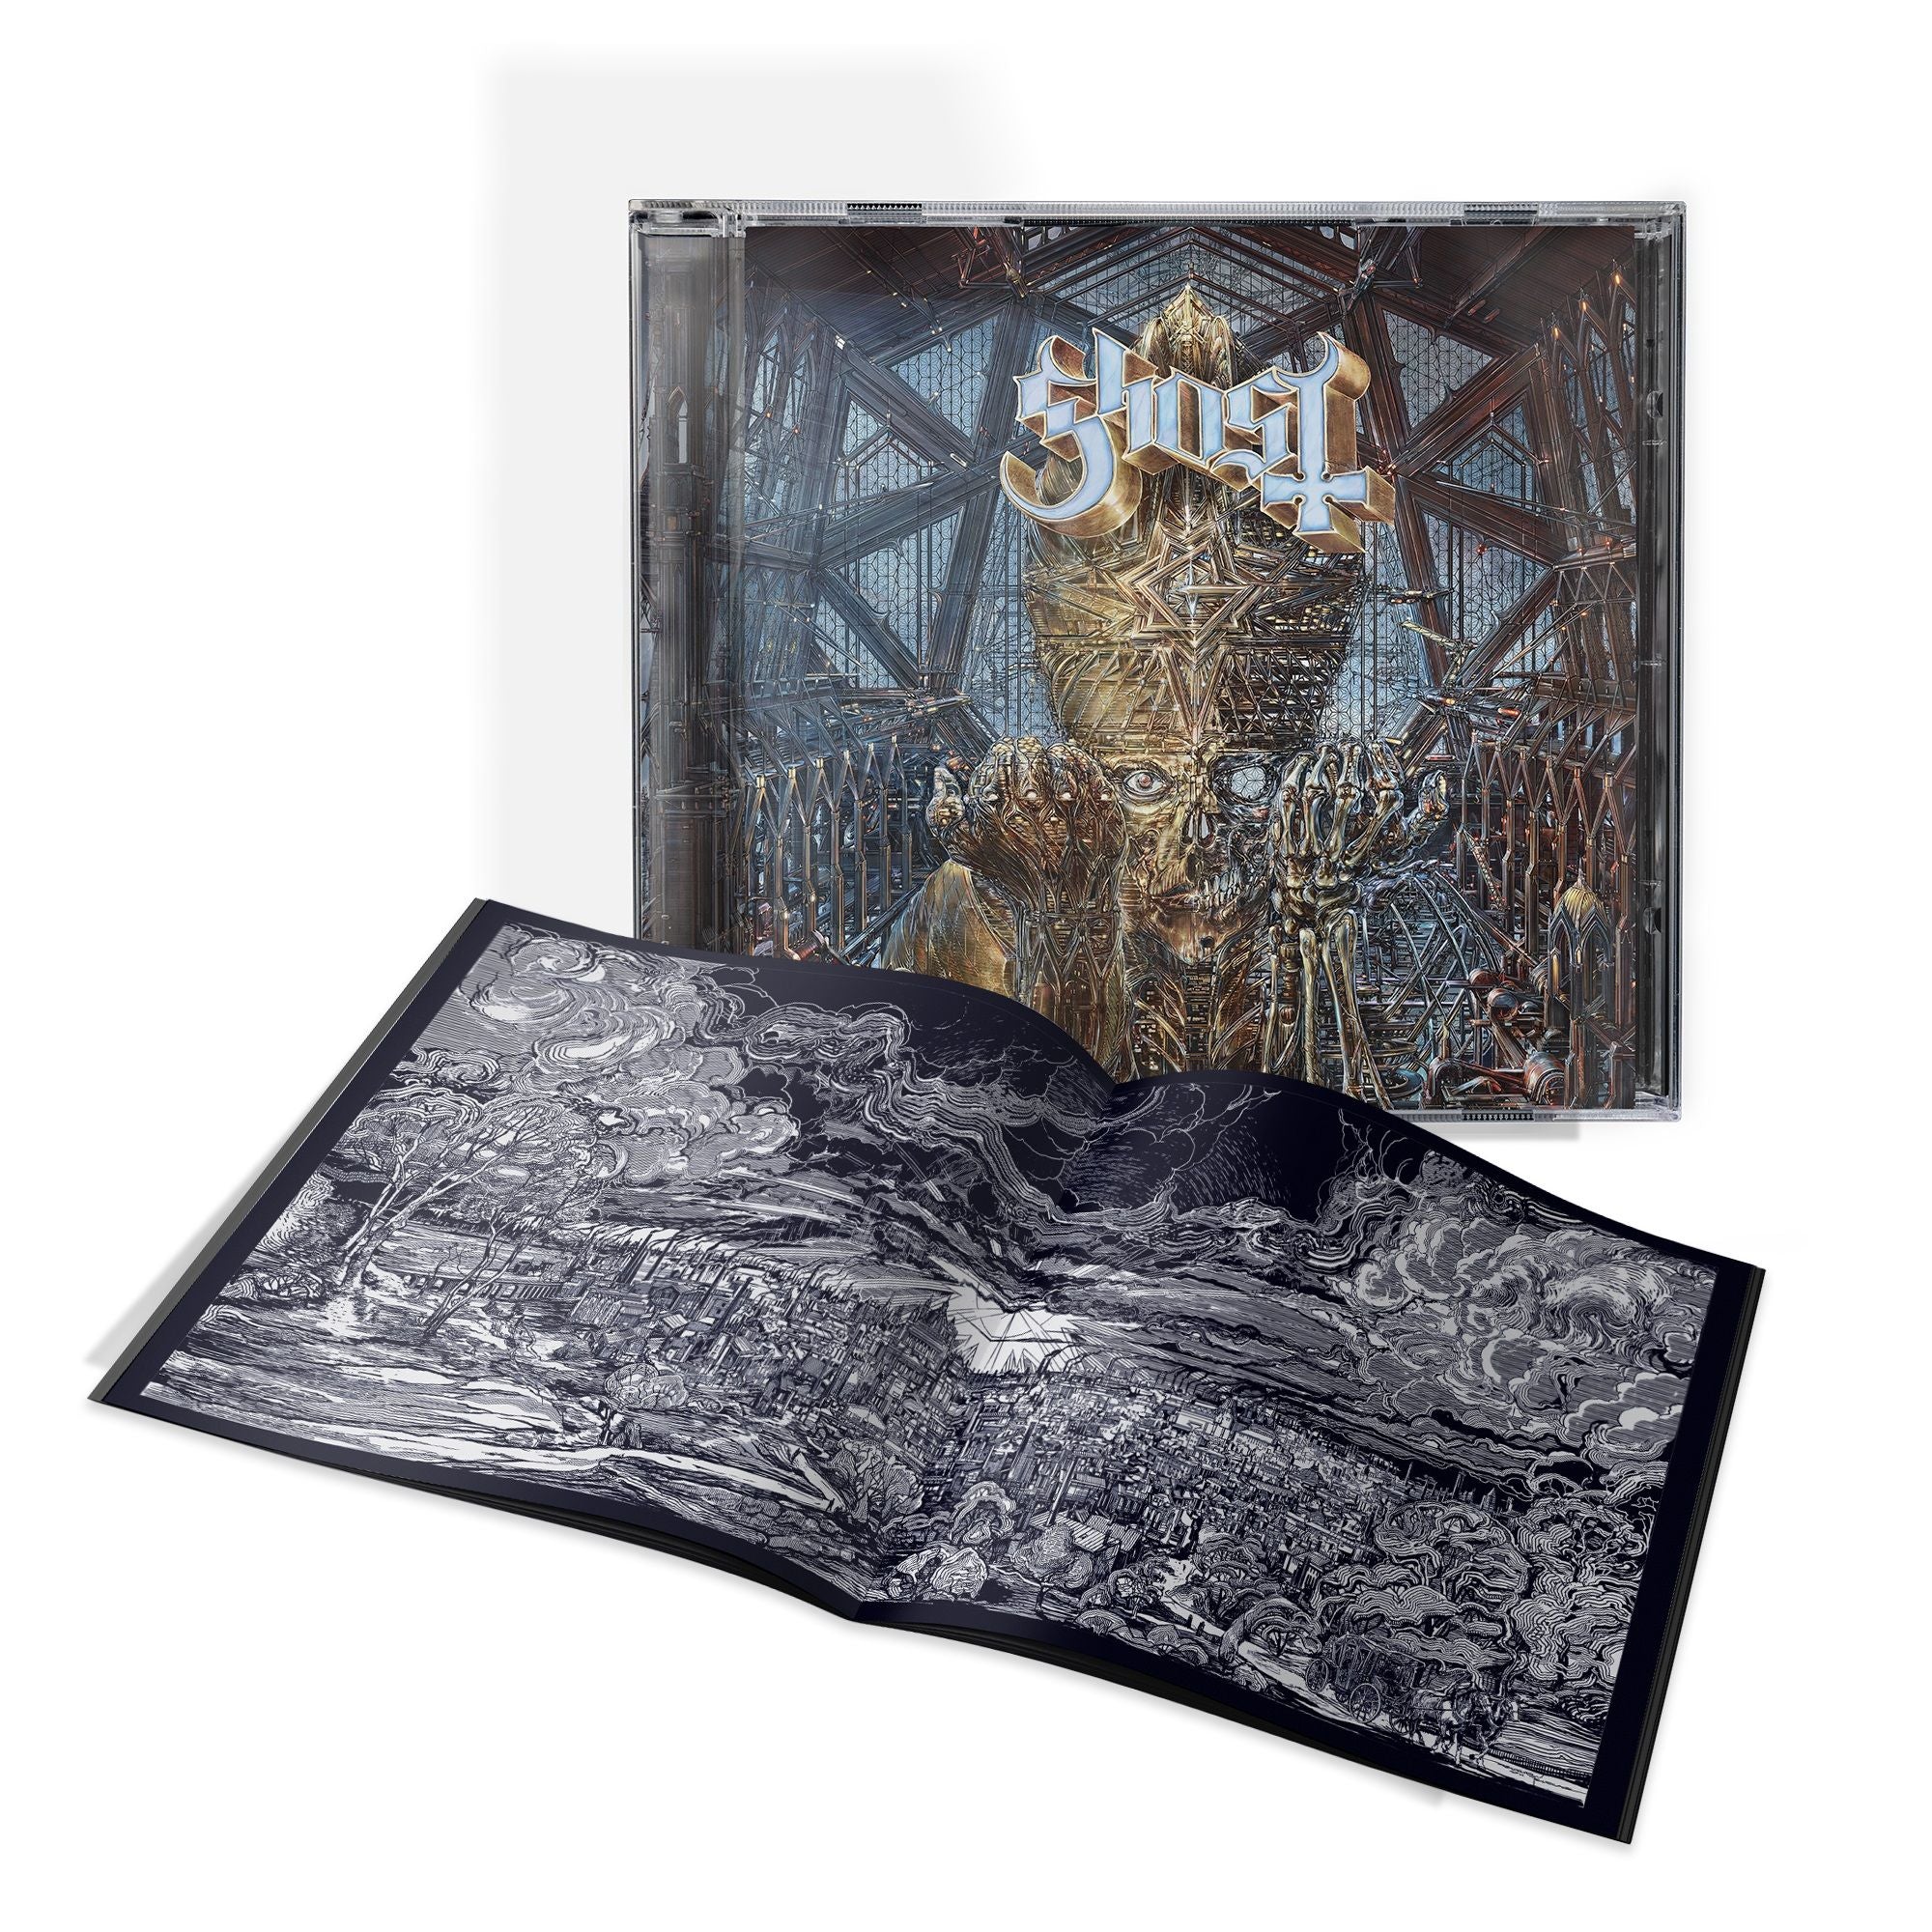 Ghost - Impera - CD - New